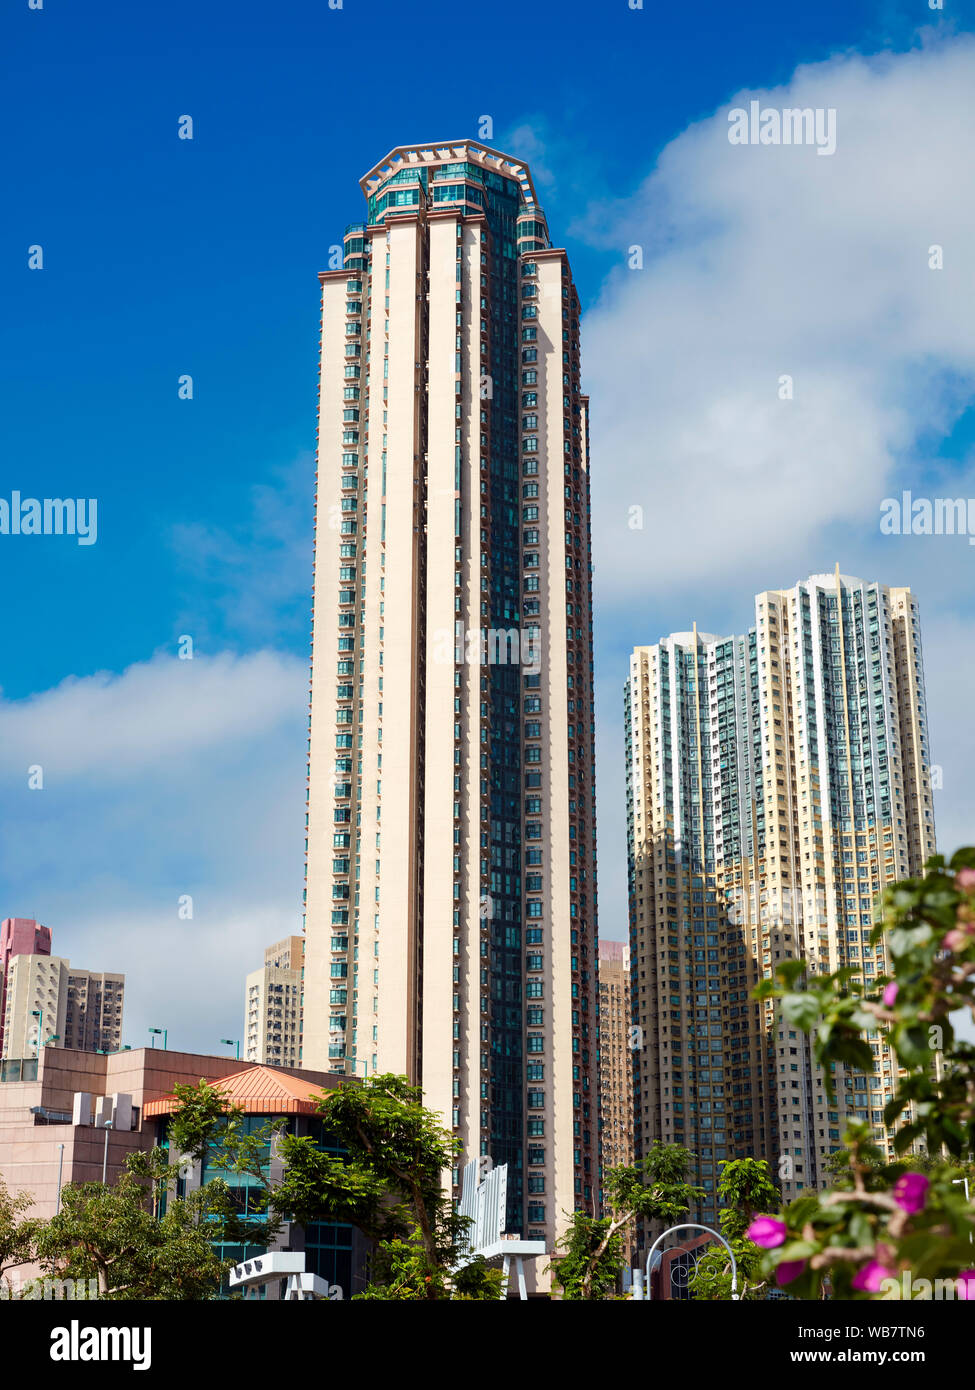 High-rise residential building of Galaxia housing complex. Diamond Hill, Kowloon, Hong Kong, China. Stock Photo